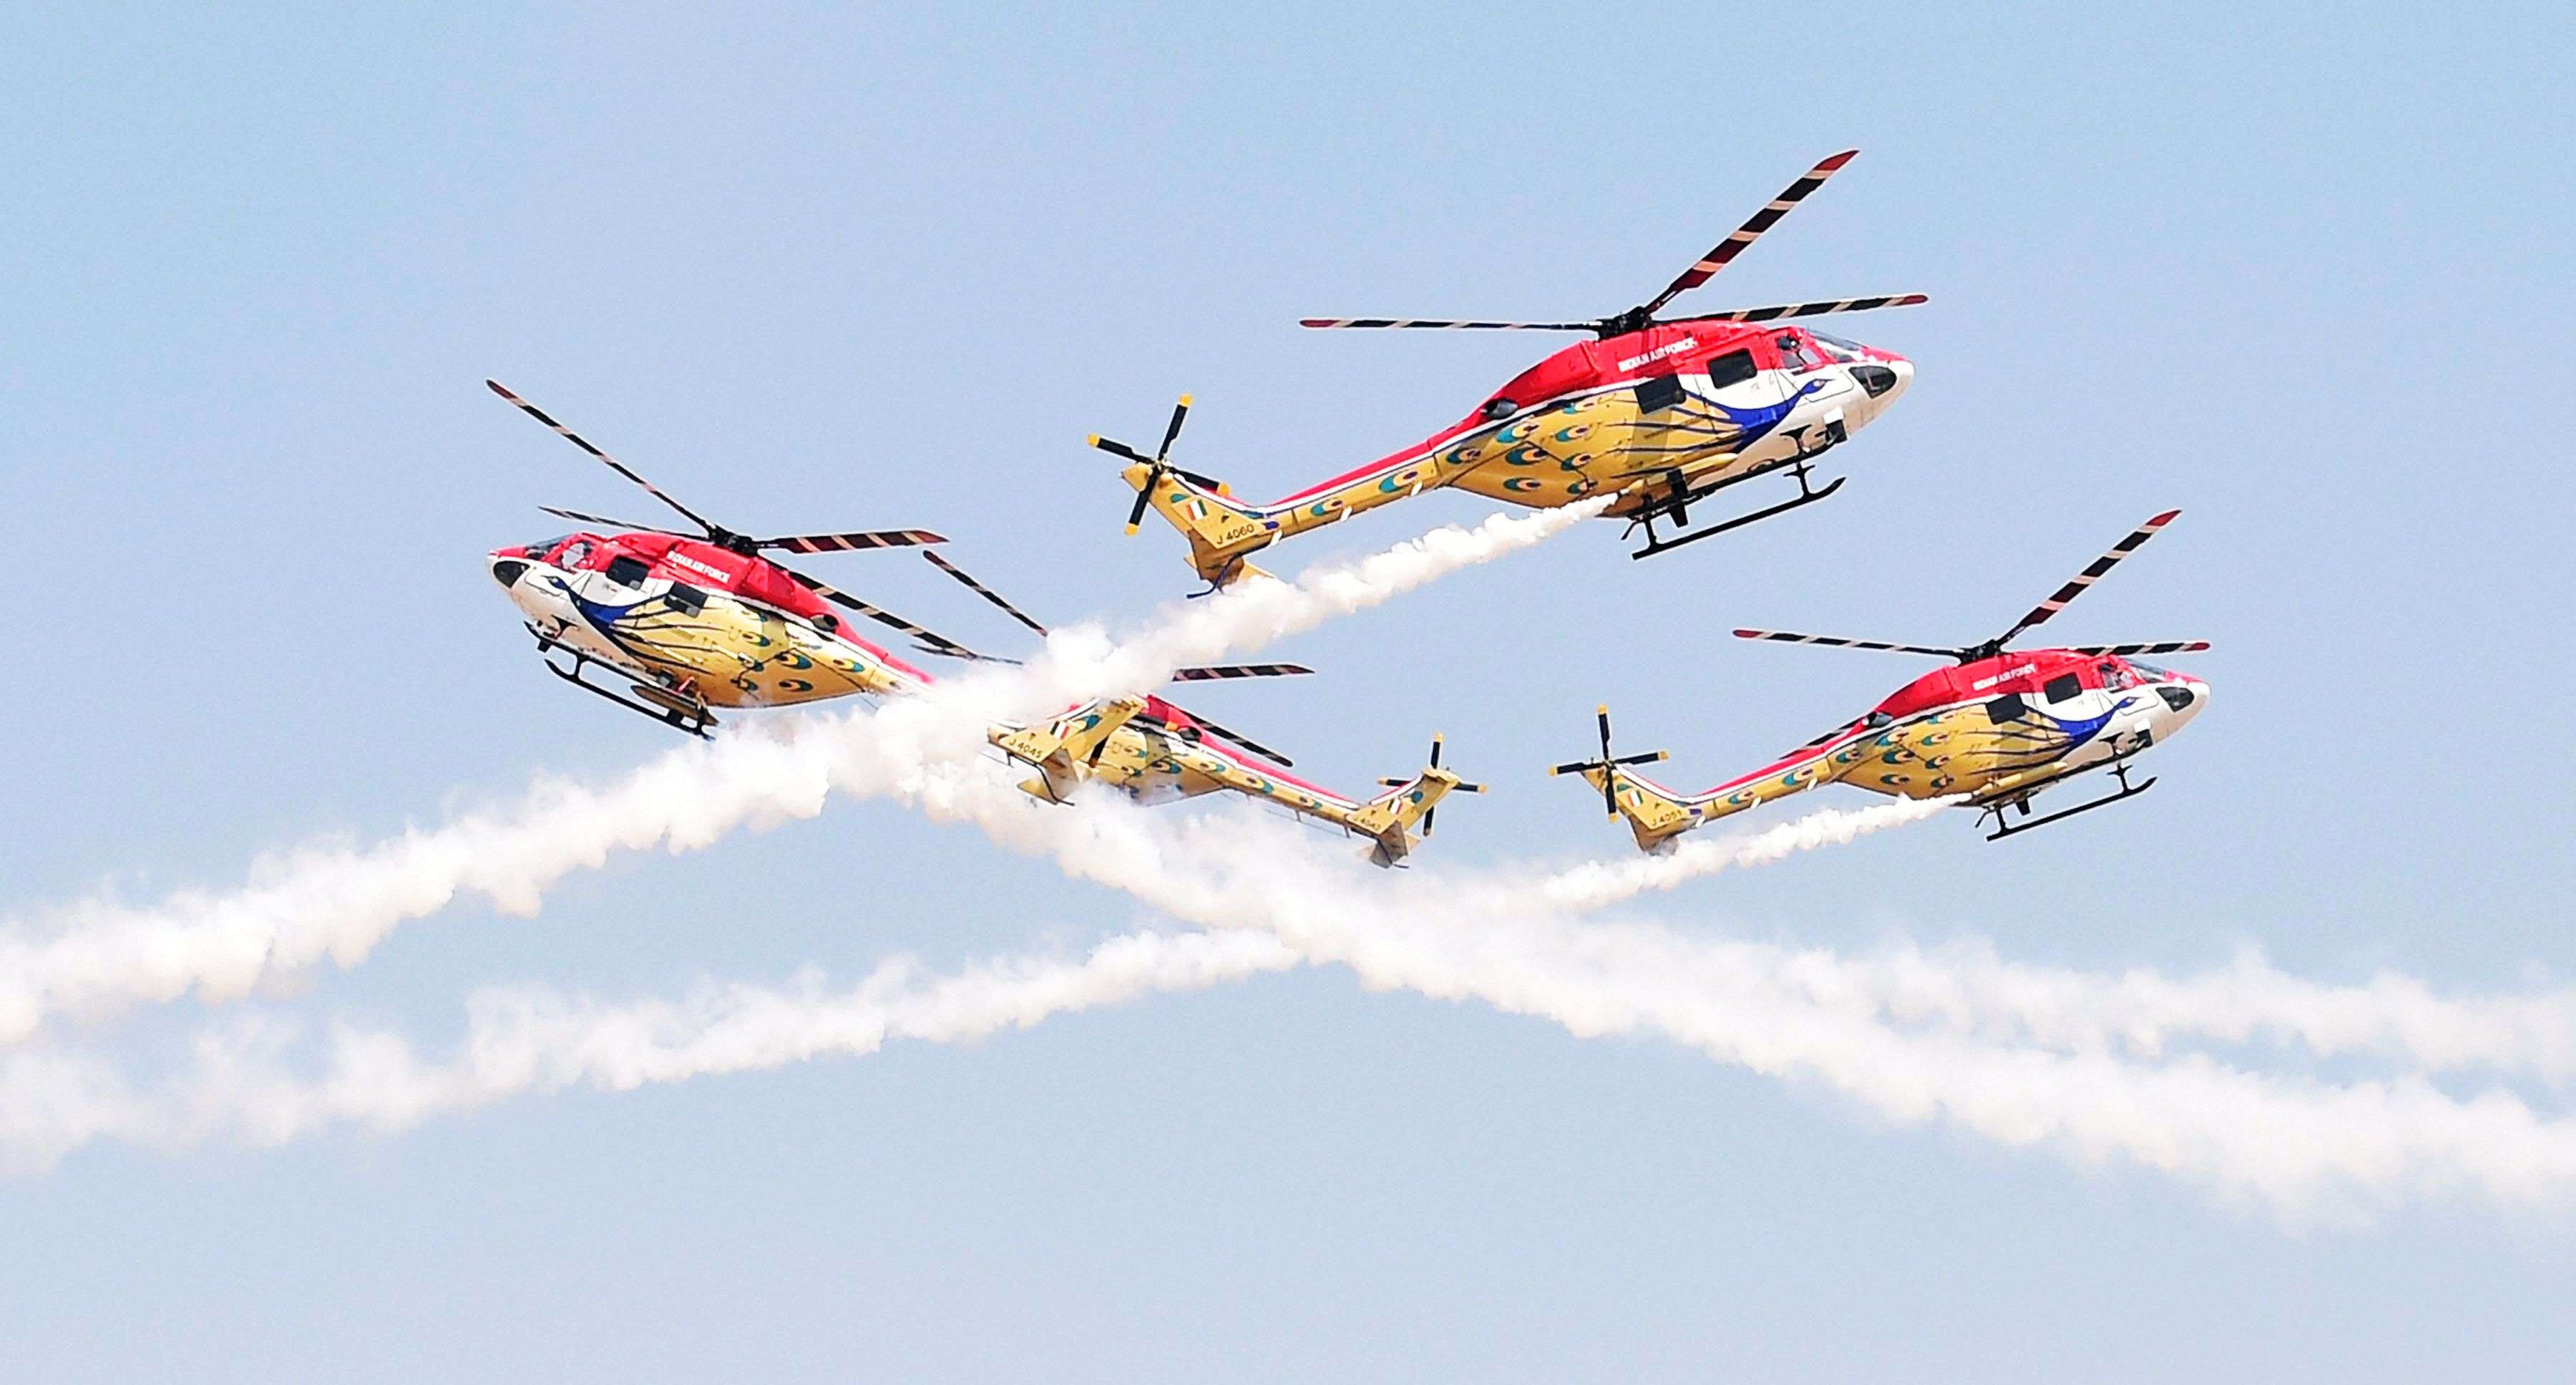 Indian Air Forces’ helicopter display team ‘Sarang’ performs during the inauguration of the Aero India event at Yelhanka Air Base in Bengaluru. (Shailendra Bhojak- PTI)